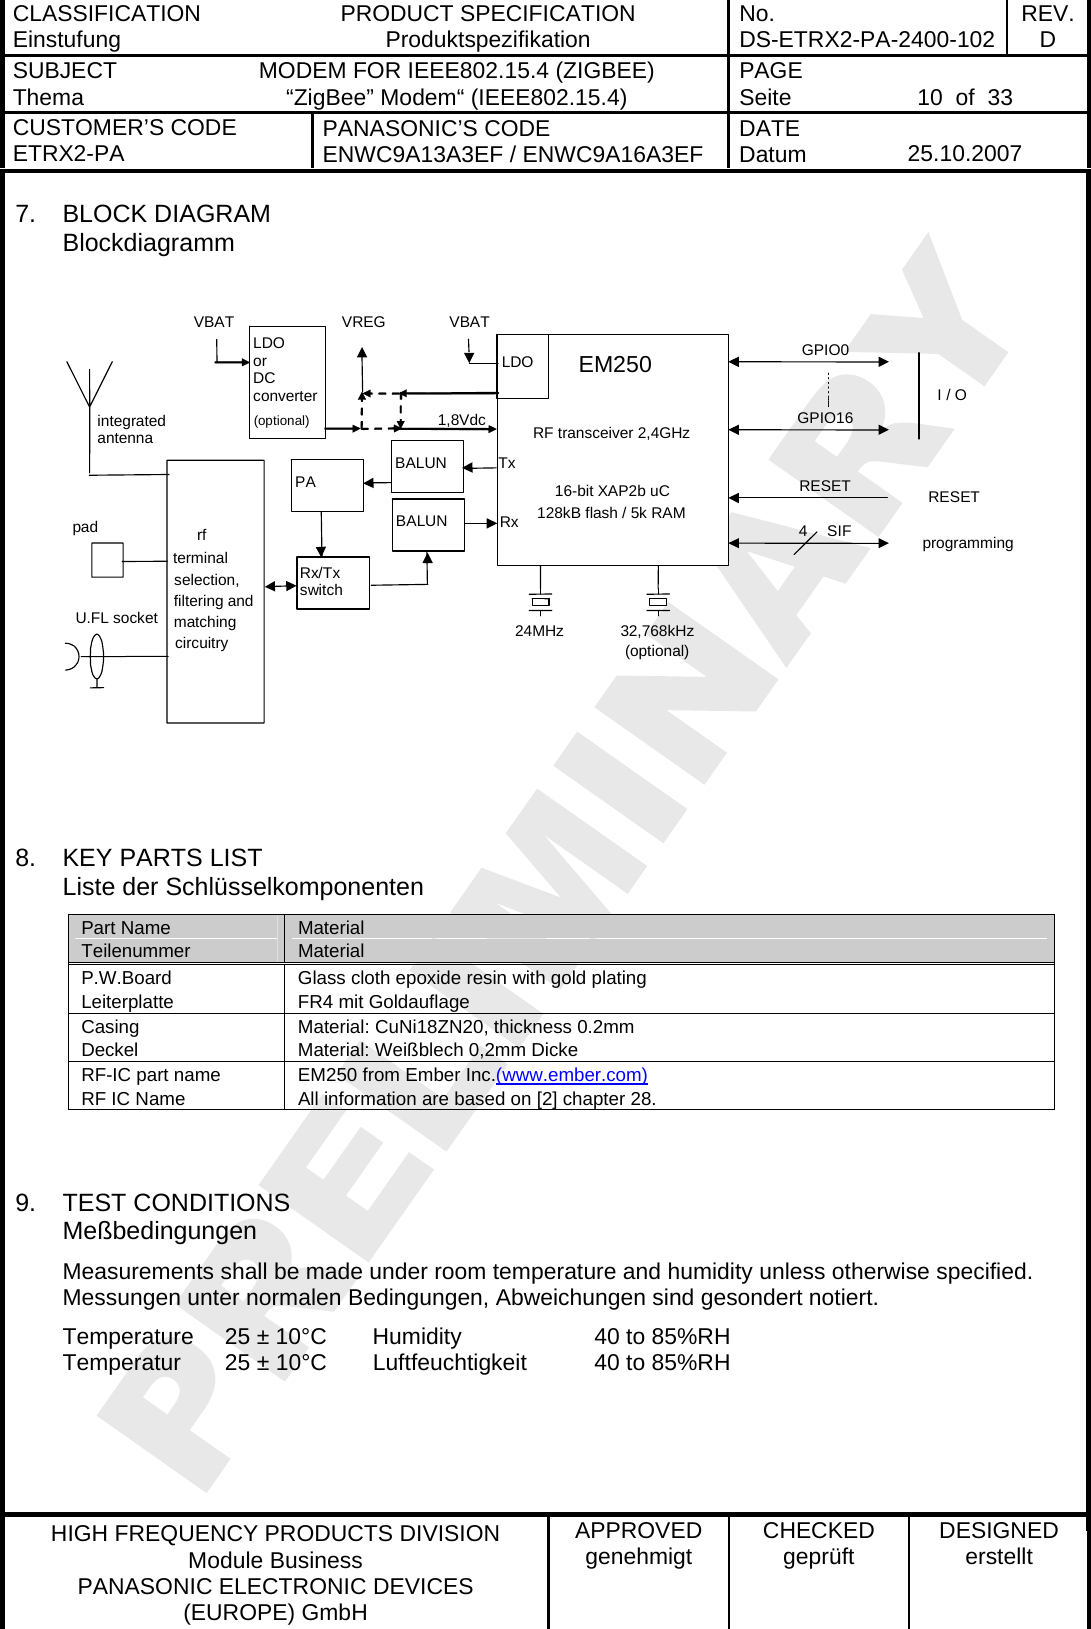 CLASSIFICATION Einstufung  PRODUCT SPECIFICATION Produktspezifikation  No. DS-ETRX2-PA-2400-102 REV.D SUBJECT Thema  MODEM FOR IEEE802.15.4 (ZIGBEE) “ZigBee” Modem“ (IEEE802.15.4)    PAGE Seite   10  of  33 CUSTOMER’S CODE ETRX2-PA  PANASONIC’S CODE ENWC9A13A3EF / ENWC9A16A3EF  DATE Datum   25.10.2007   HIGH FREQUENCY PRODUCTS DIVISION Module Business PANASONIC ELECTRONIC DEVICES  (EUROPE) GmbH APPROVED genehmigt  CHECKED geprüft  DESIGNED erstellt 7. BLOCK DIAGRAM Blockdiagramm   24MHz 32,768kHz(optional)EM250RF transceiver 2,4GHz16-bit XAP2b uC128kB flash / 5k RAMGPIO0 GPIO16 I / Oprogramming4 SIF LDO or DC converter (optional) VBATVBAT VREG RESET RESETBALUNintegrated antenna pad U.FL socket rf terminal selection, filtering and matching circuitry    LDO 1,8VdcTxRxBALUNRx/Tx switch PA    8.  KEY PARTS LIST Liste der Schlüsselkomponenten Part Name Teilenummer Material Material P.W.Board Leiterplatte Glass cloth epoxide resin with gold plating  FR4 mit Goldauflage Casing Deckel Material: CuNi18ZN20, thickness 0.2mm Material: Weißblech 0,2mm Dicke RF-IC part name RF IC Name EM250 from Ember Inc.(www.ember.com)All information are based on [2] chapter 28.   9. TEST CONDITIONS Meßbedingungen Measurements shall be made under room temperature and humidity unless otherwise specified. Messungen unter normalen Bedingungen, Abweichungen sind gesondert notiert. Temperature  25 ± 10°C  Humidity    40 to 85%RH Temperatur  25 ± 10°C  Luftfeuchtigkeit  40 to 85%RH  